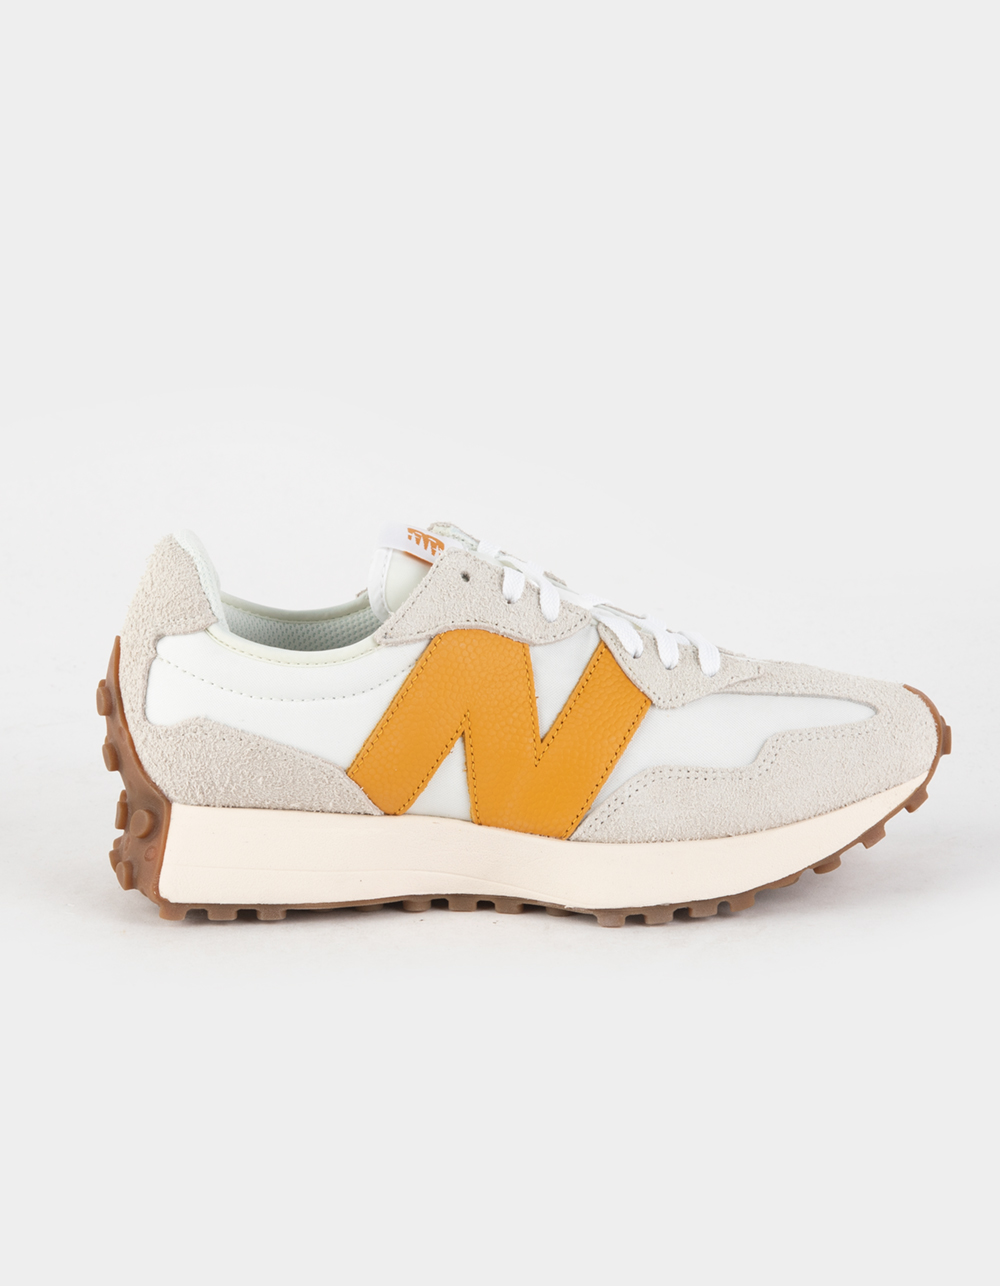 NEW BALANCE 327 Womens Shoes - YELLOW | Tillys